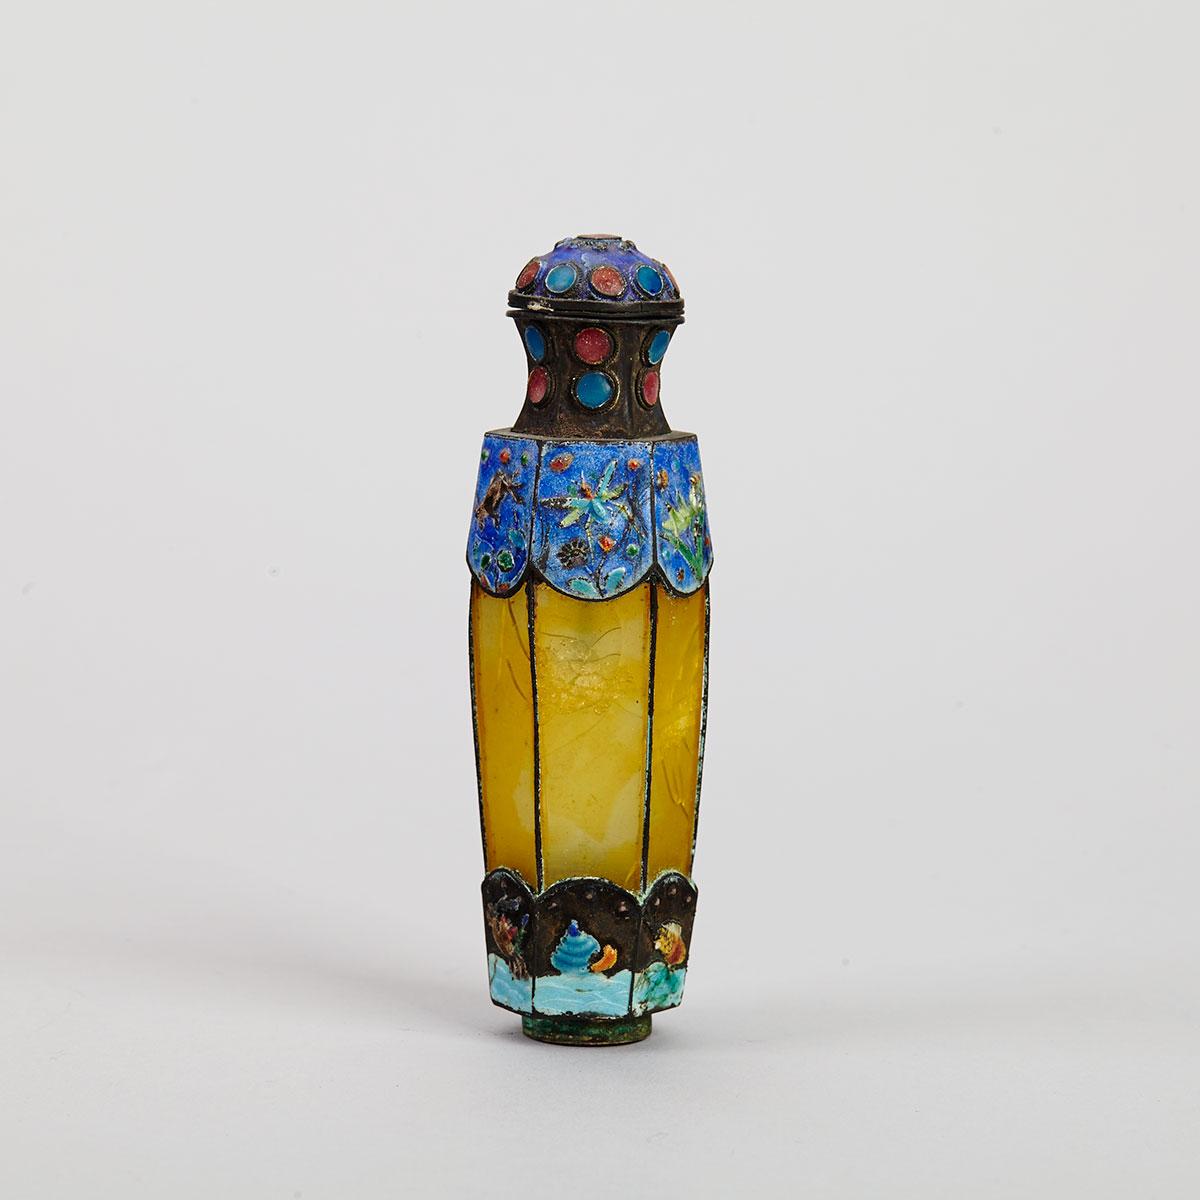 Rare Silver, Amber and Enamel Snuff Bottle, Late Qing Dynasty